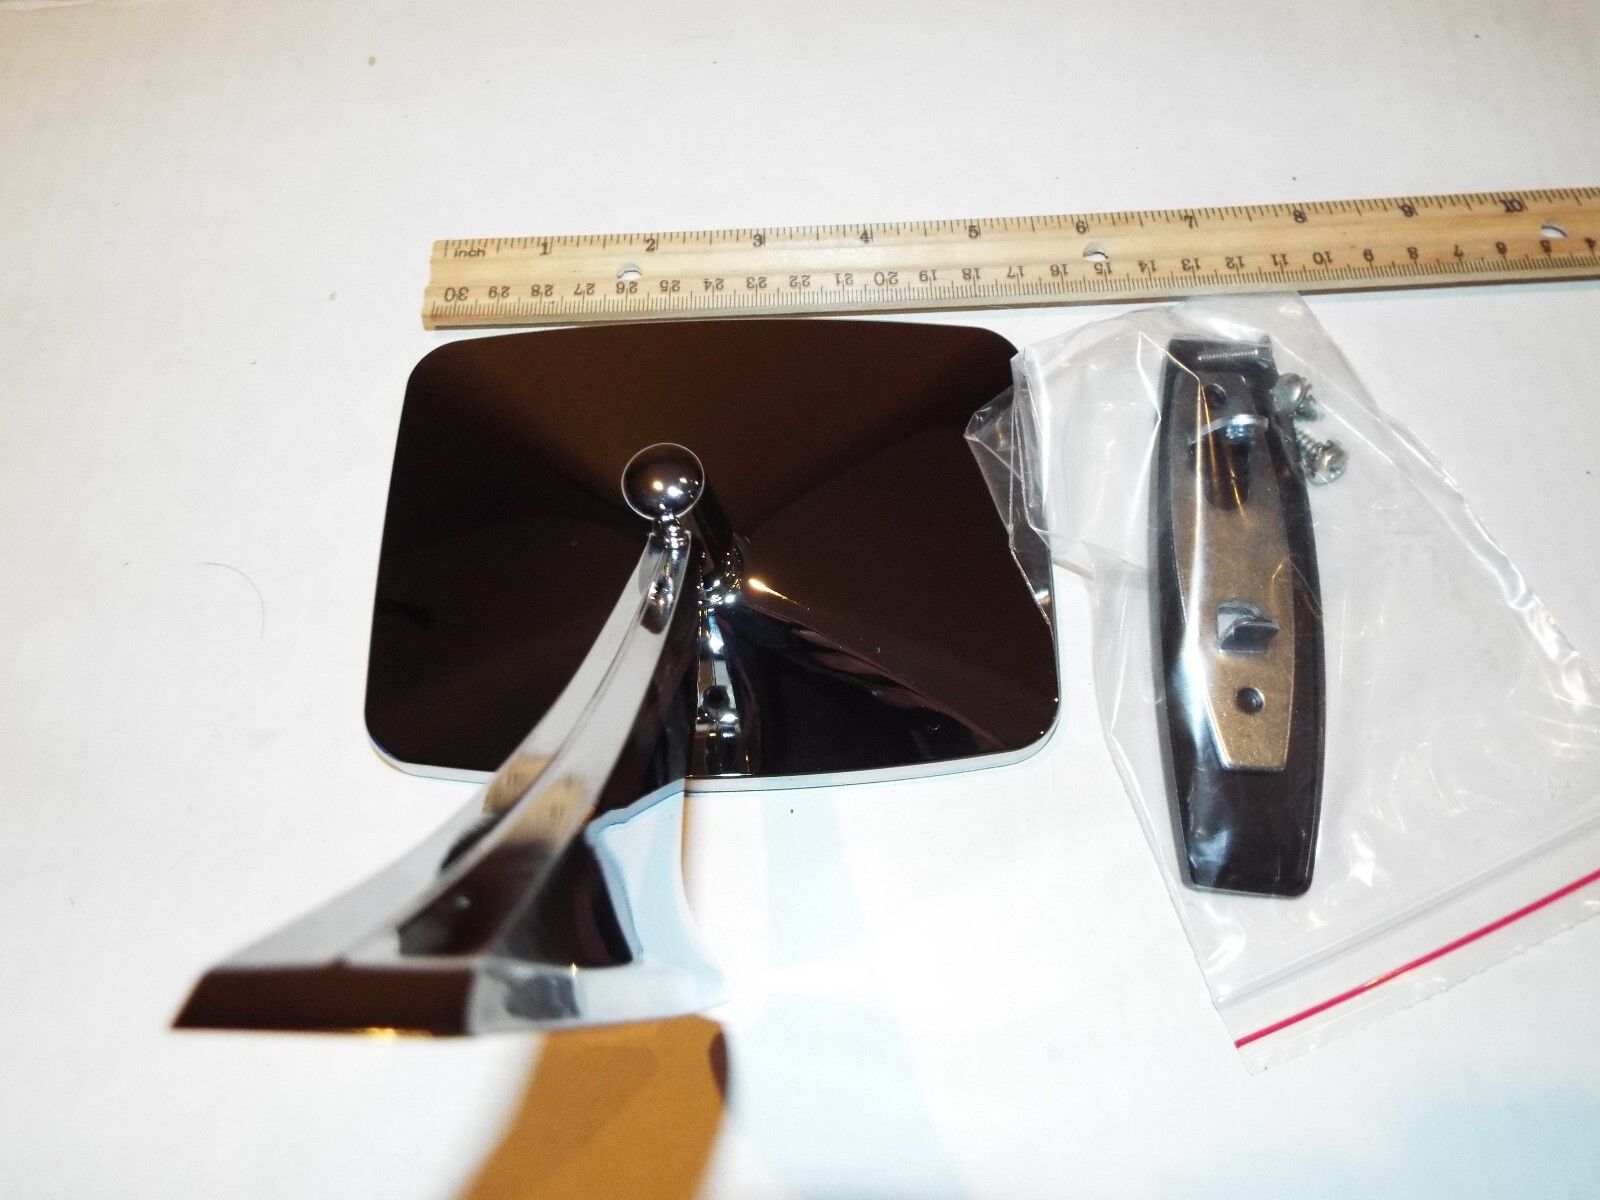 81 82 83 84 85 86 87 88  Chevy Truck Chrome Outside Sport Rear View Door Mirror